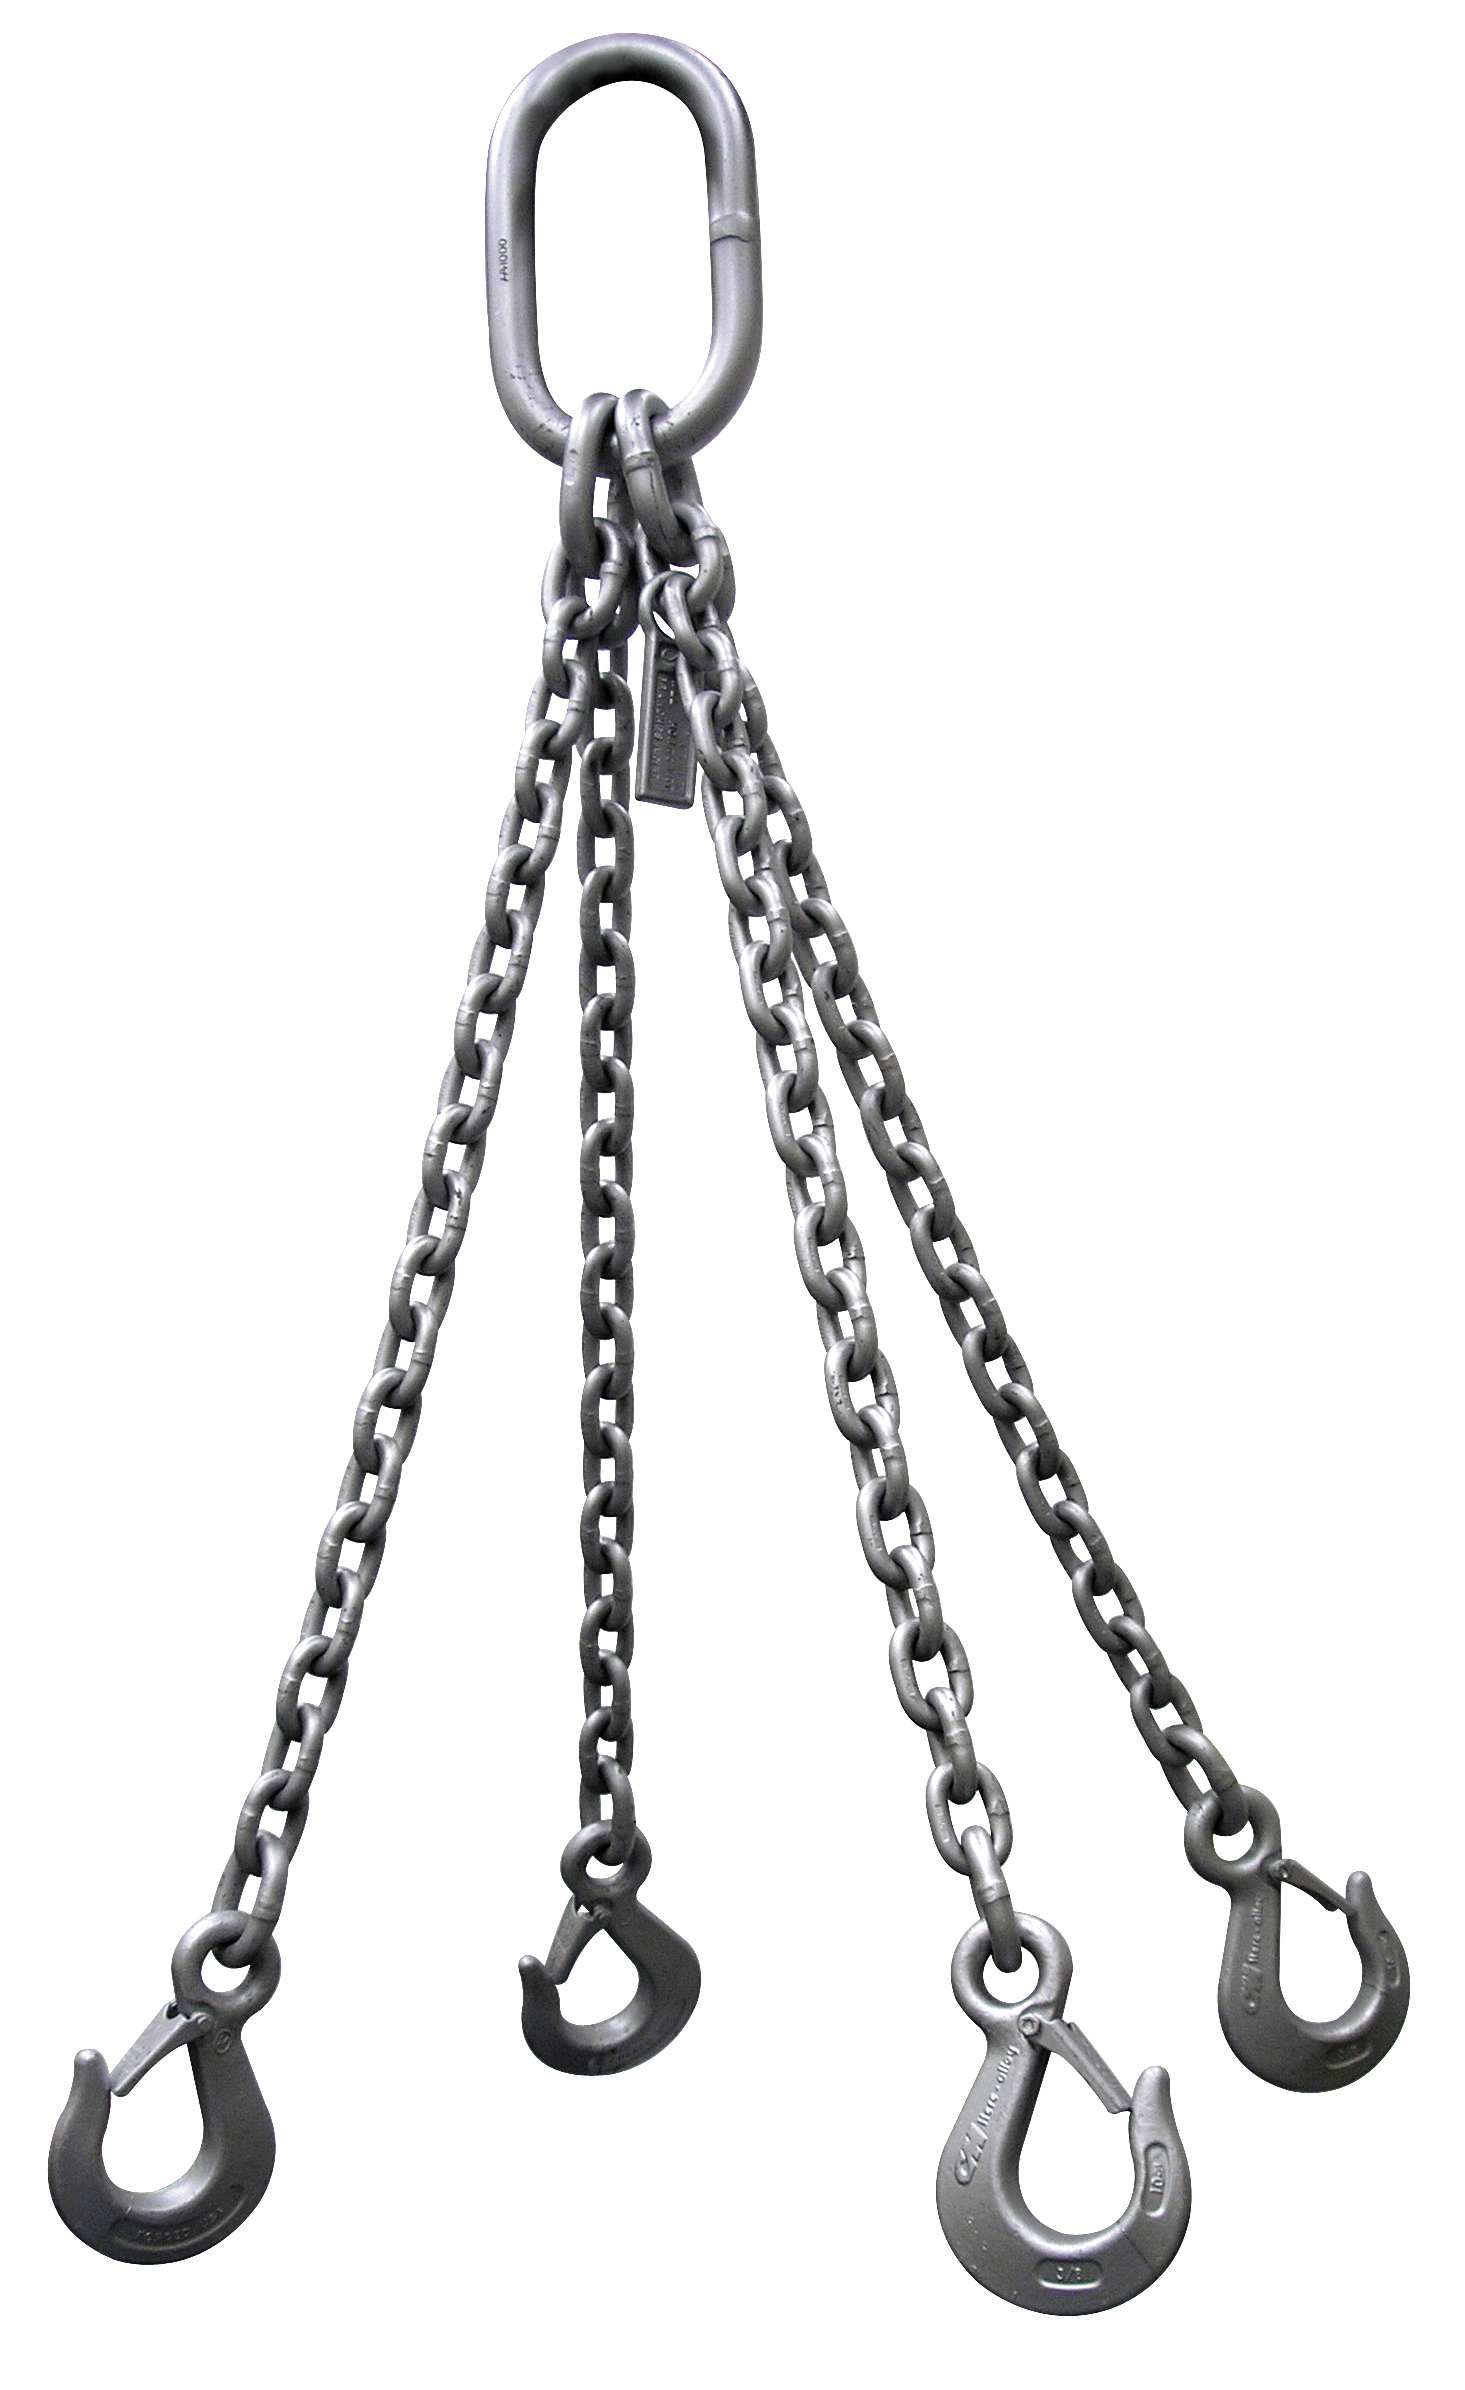 Chain, Sling, Hook Inspection